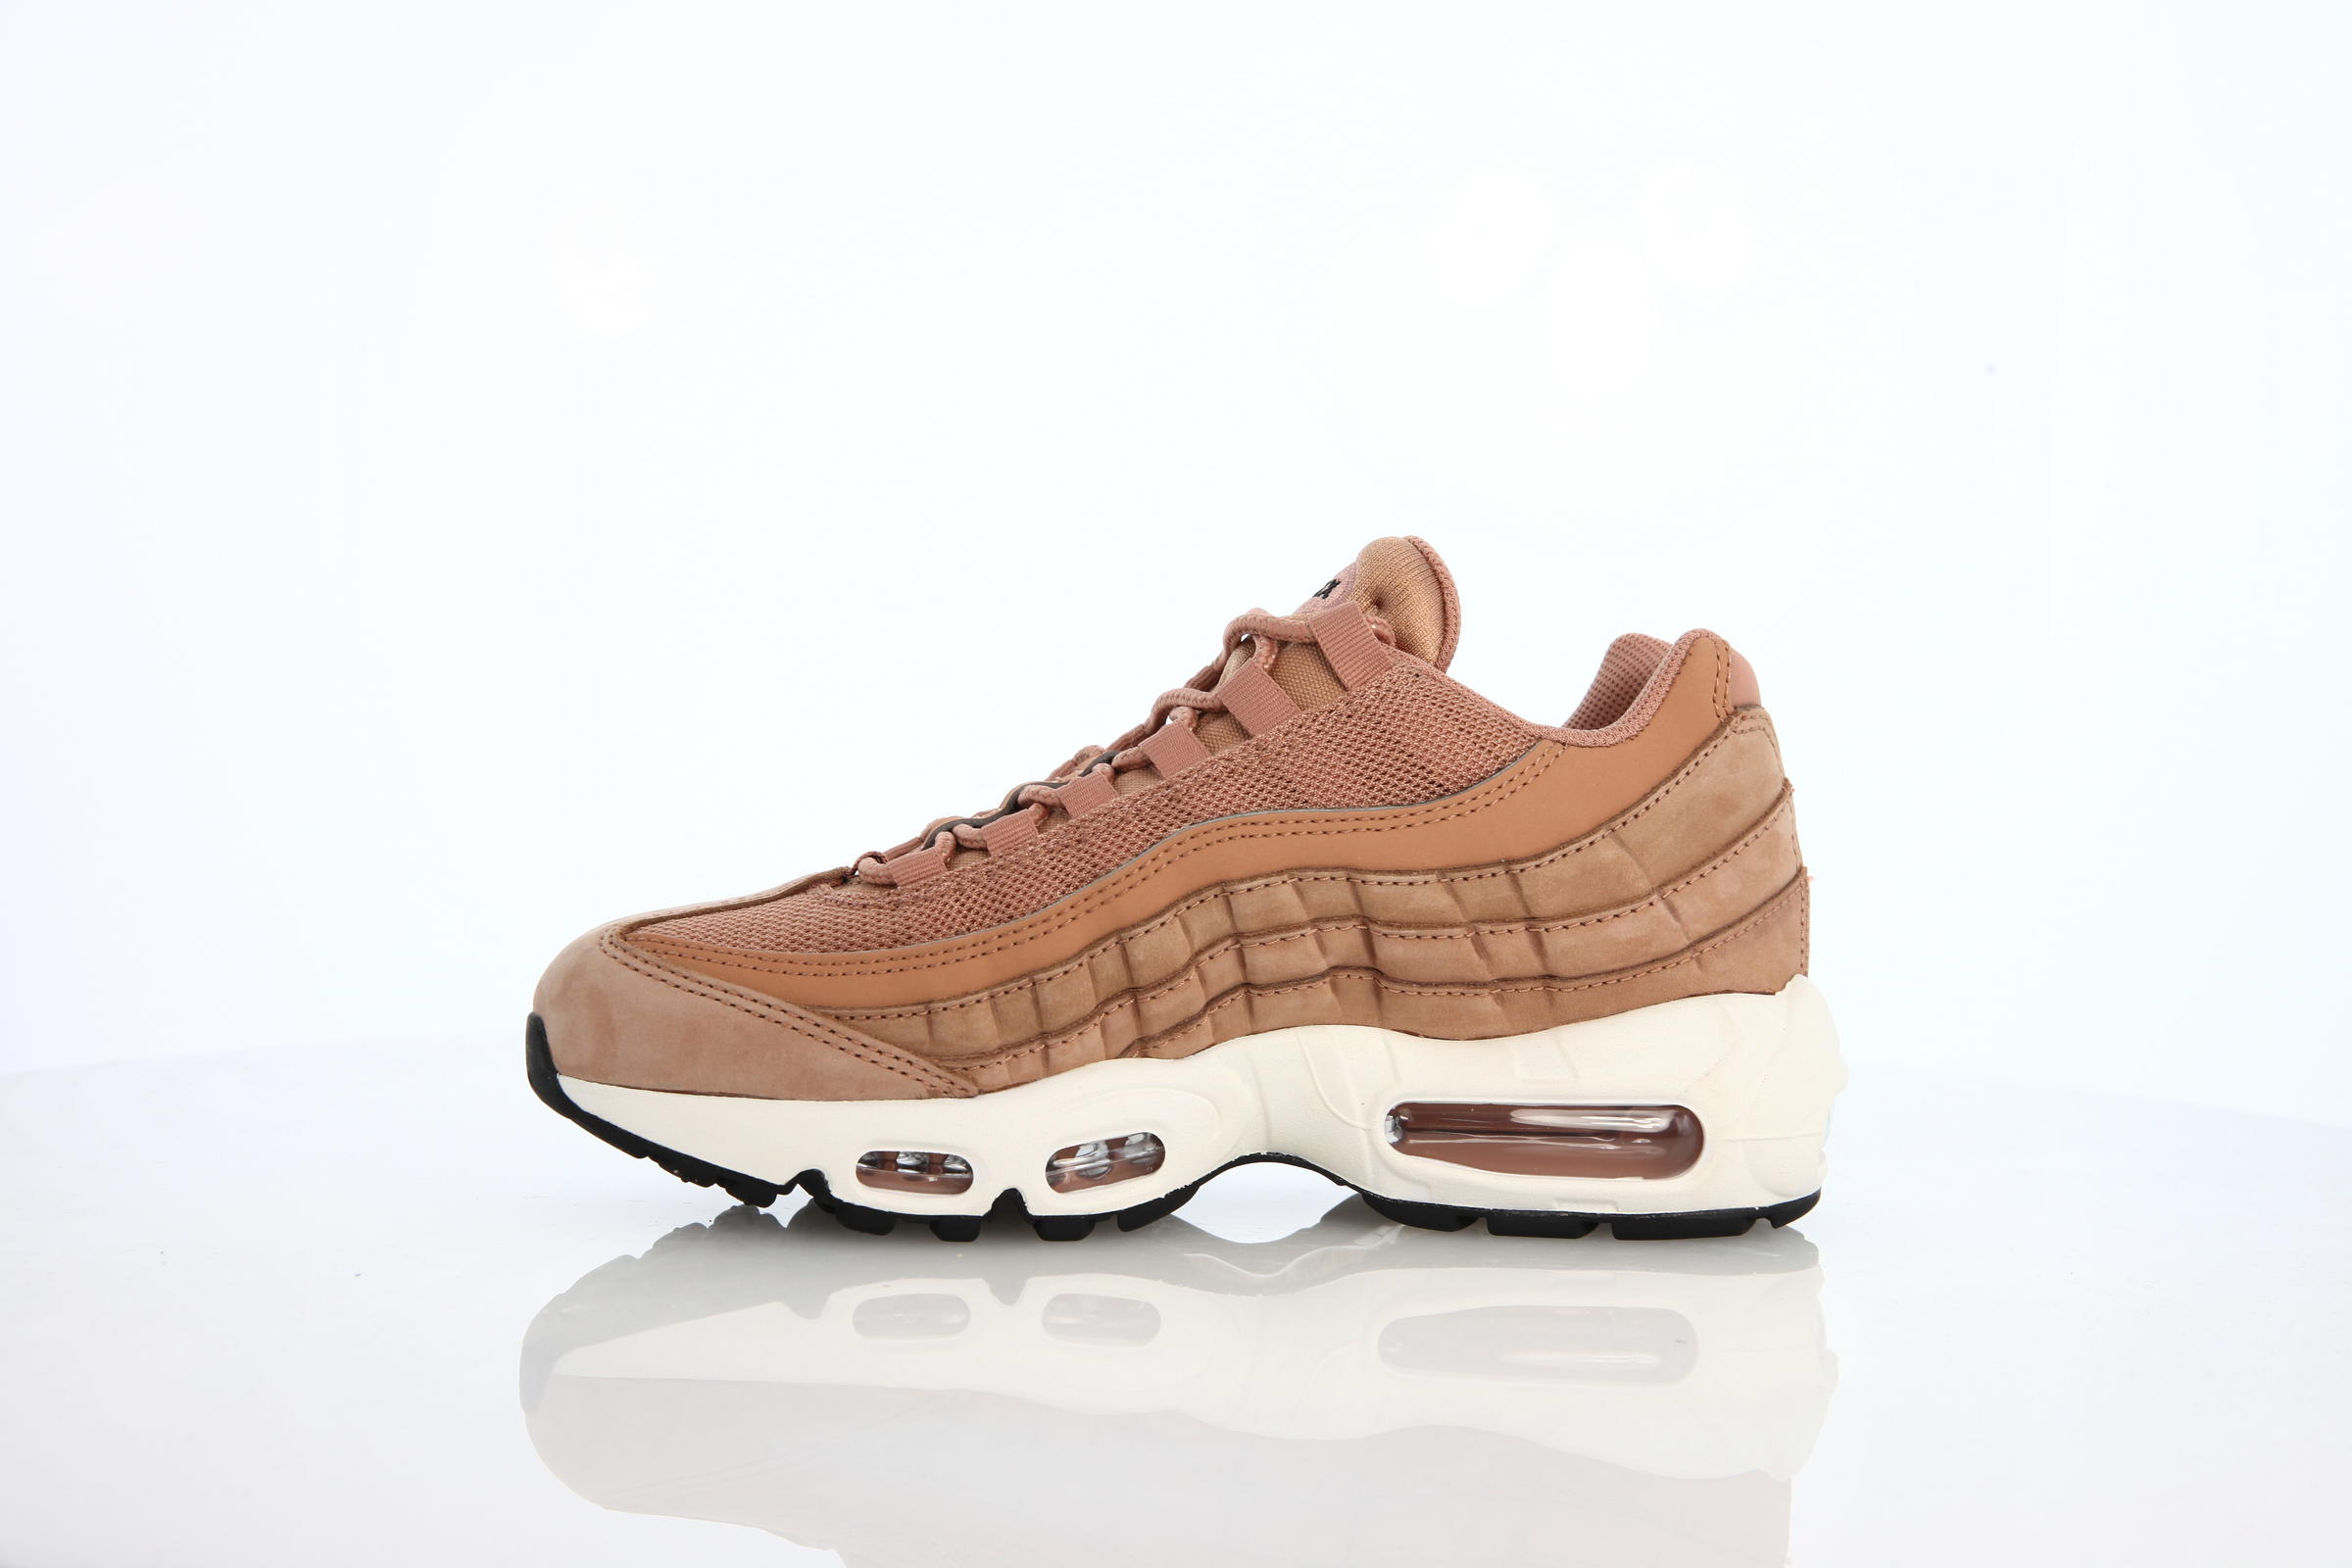 Nike Wmns Air Max 95 "Dusted Clay"